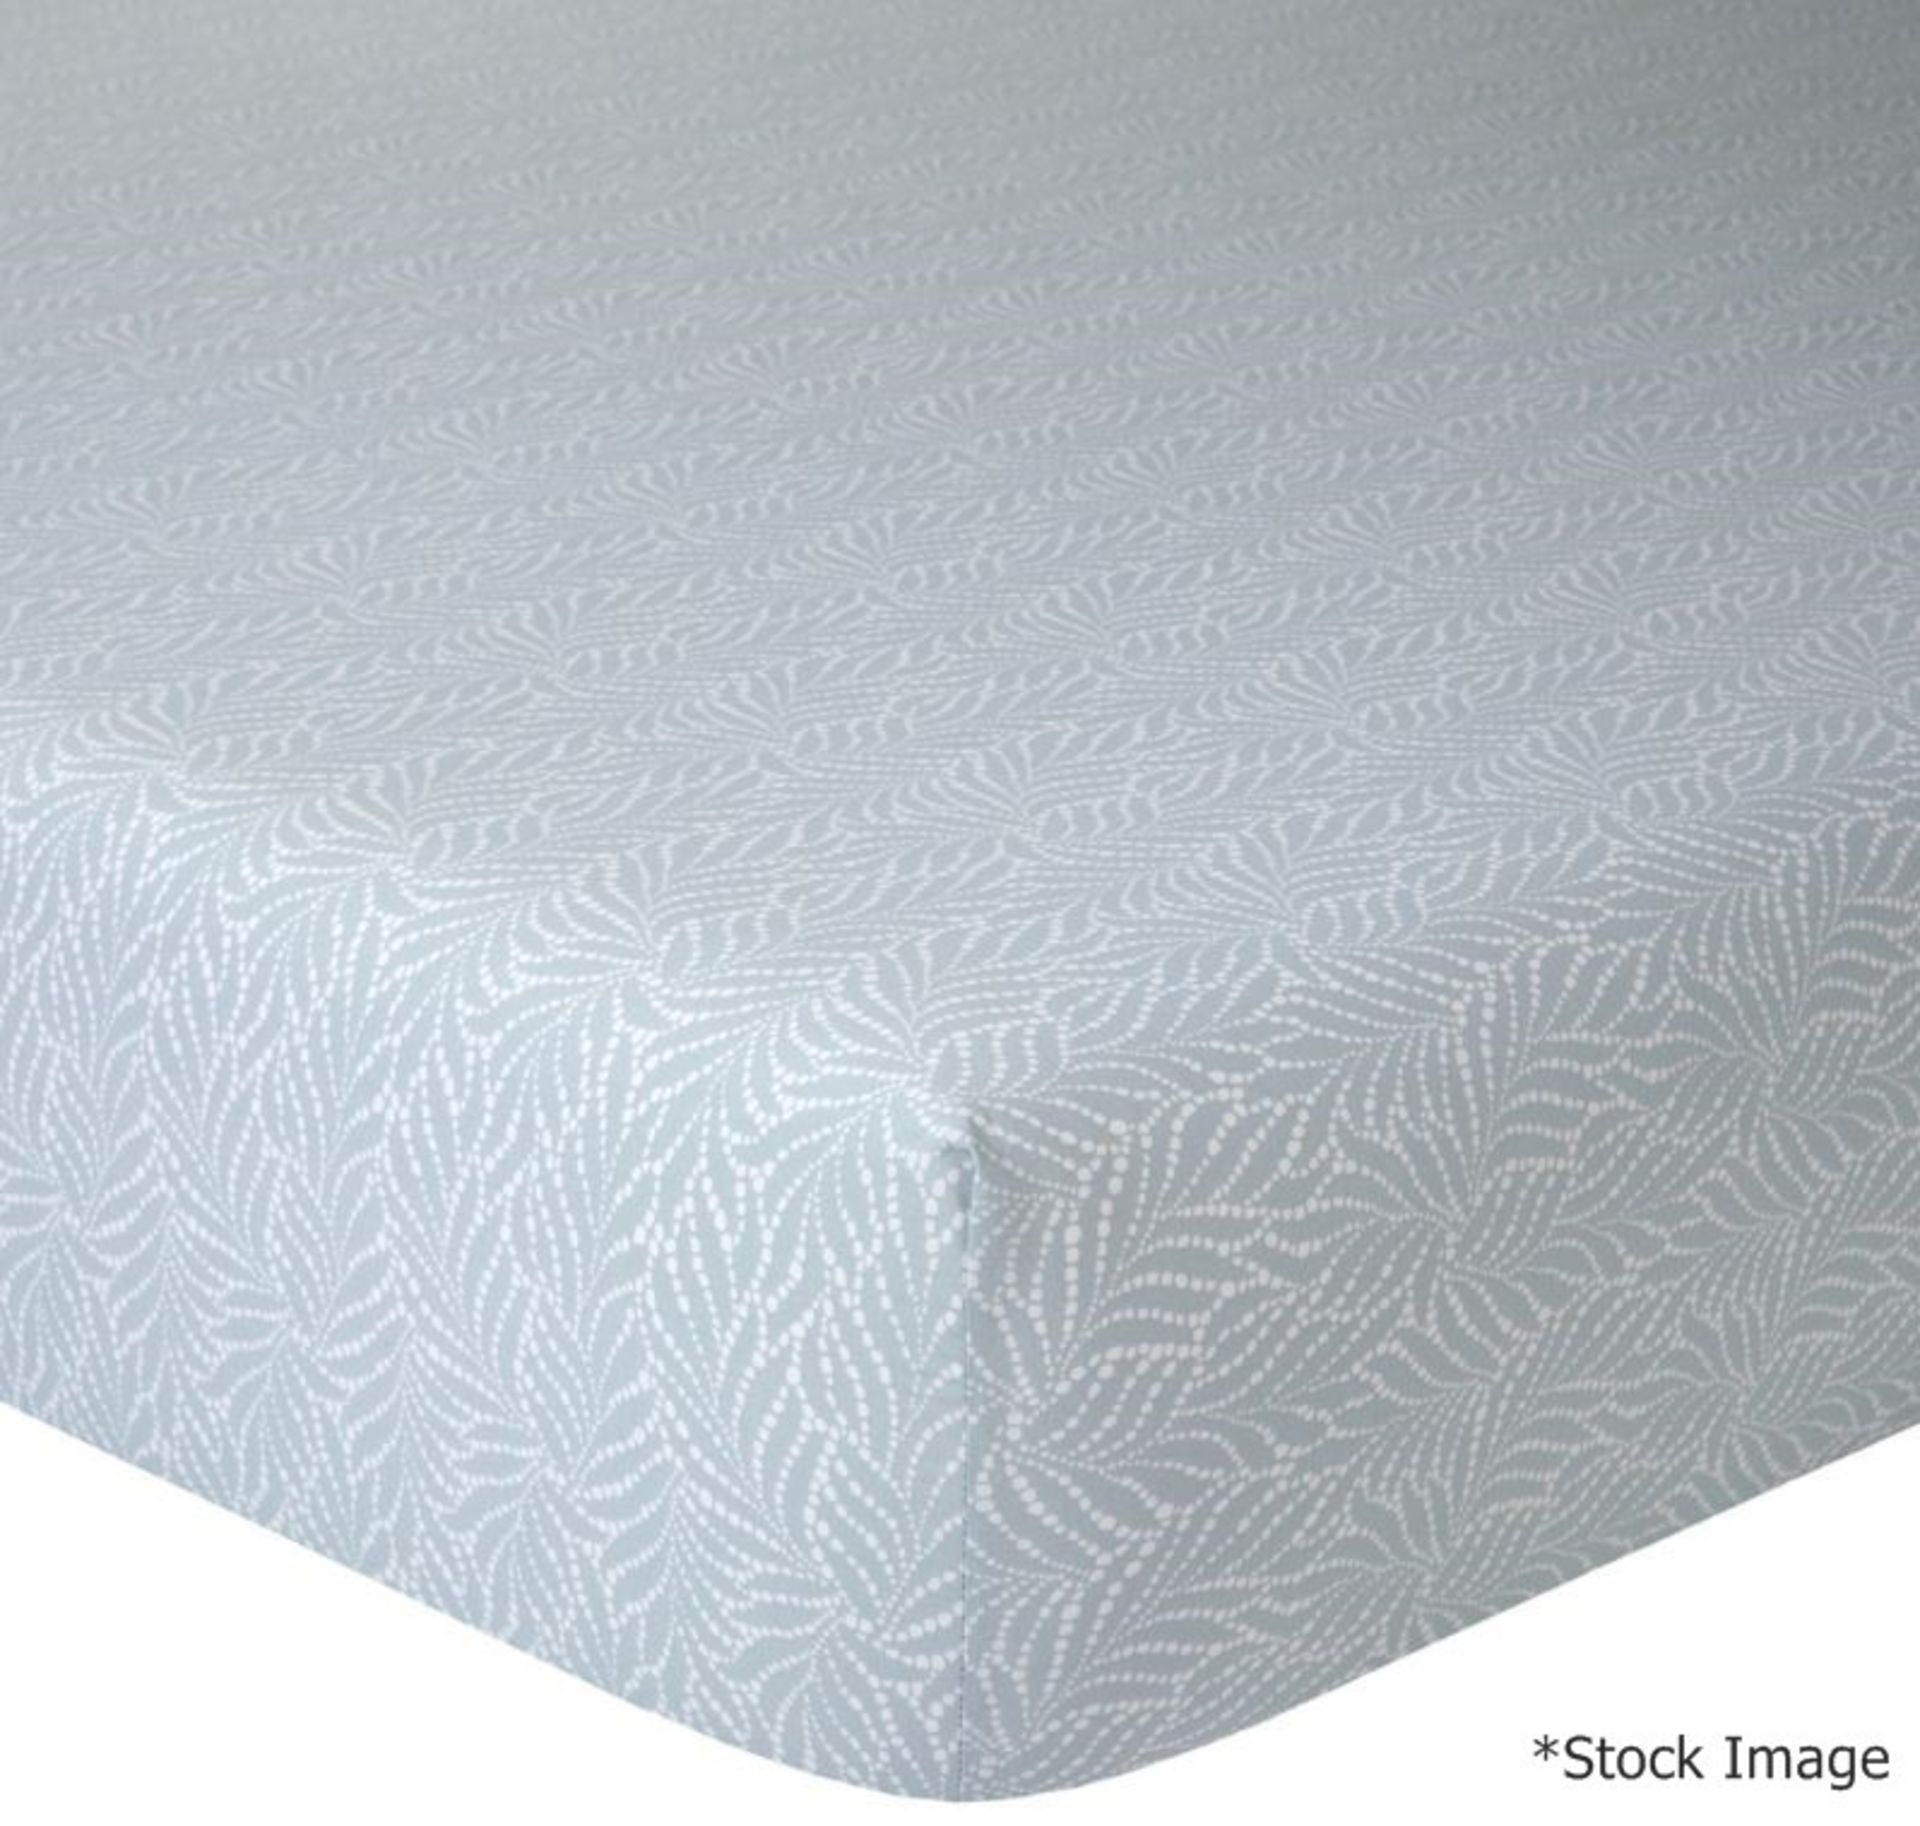 1 x YVES DELORME 'Caliopee' Single 100% Cotton Fitted Sheet (90cm x 190cm) - Unused Stock